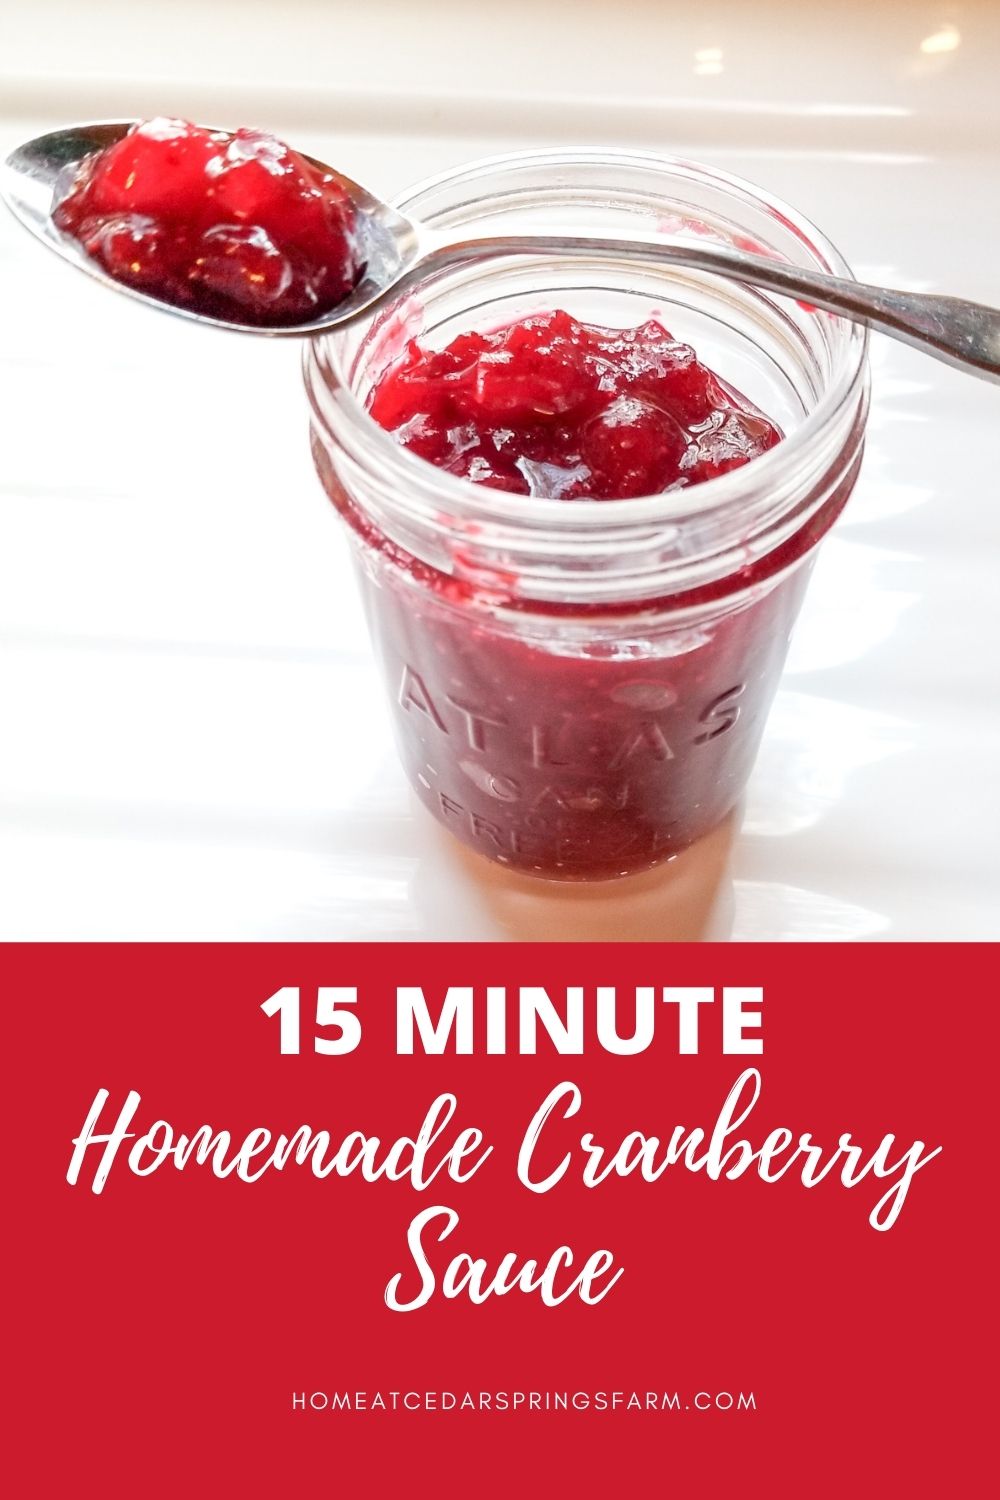 15 Minute Homemade Cranberry Sauce in a jar with text overlay.